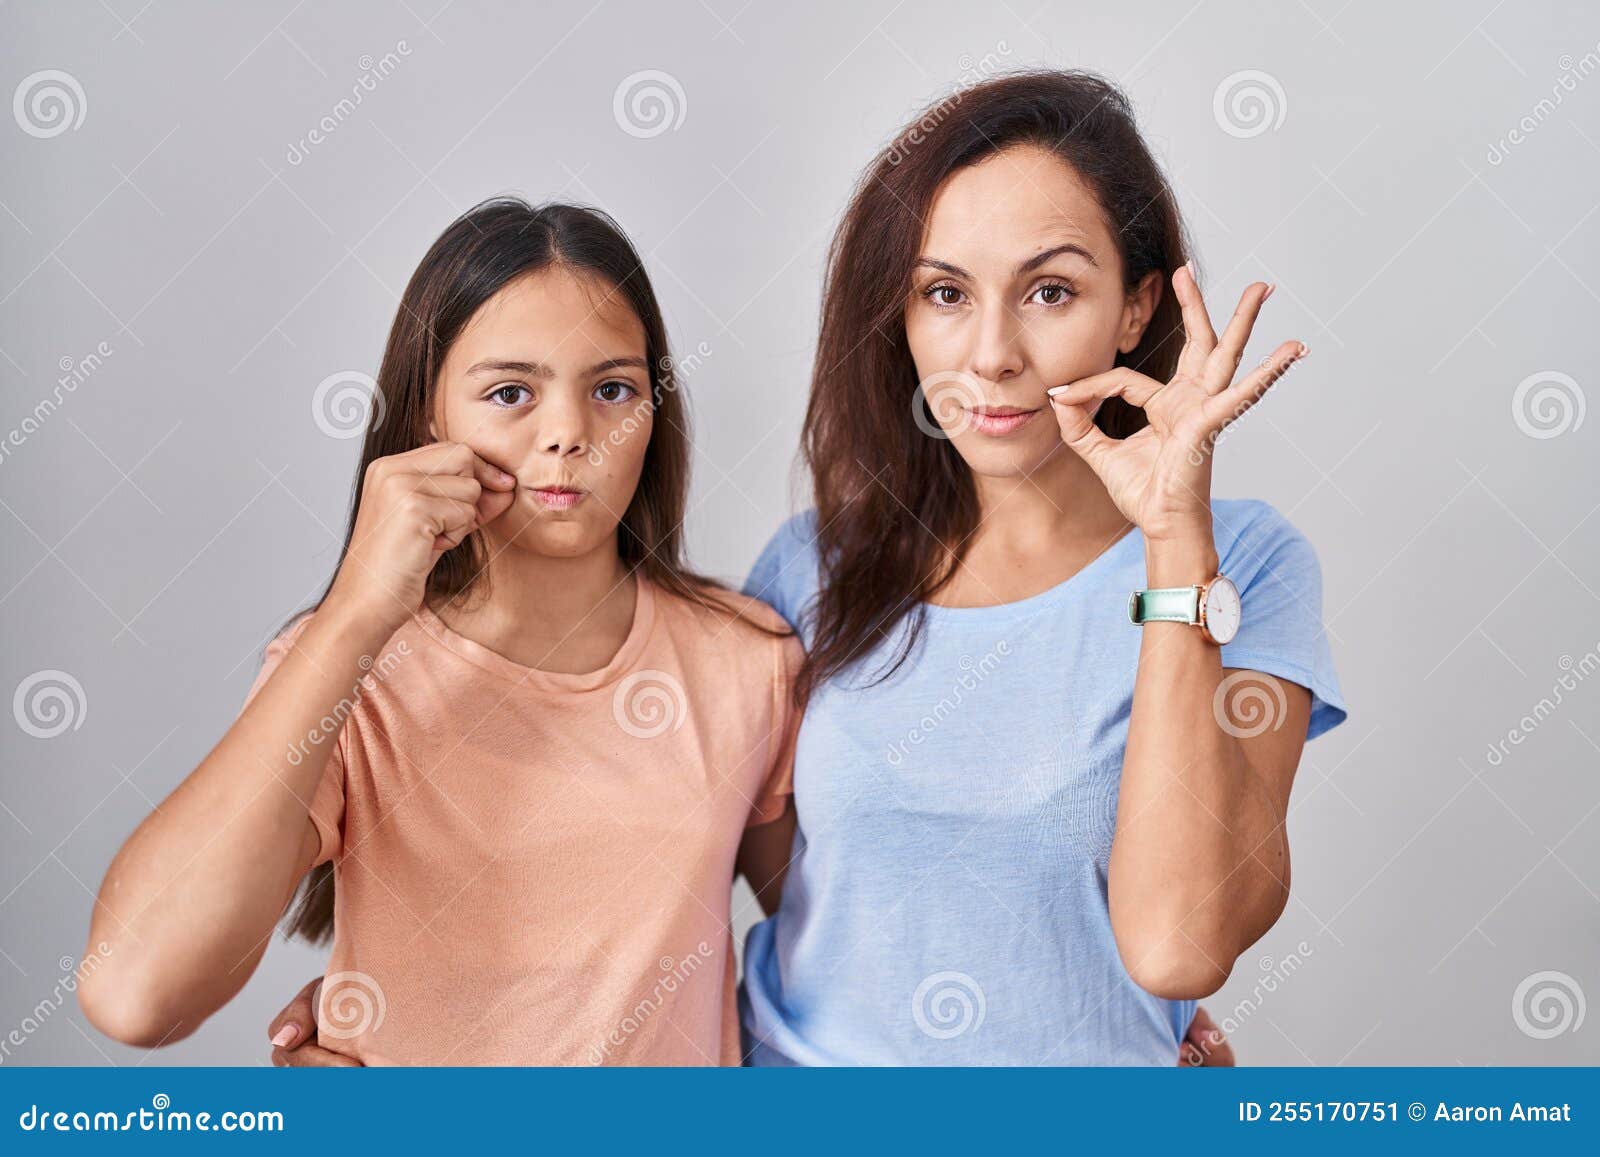 mother and daughter taboo